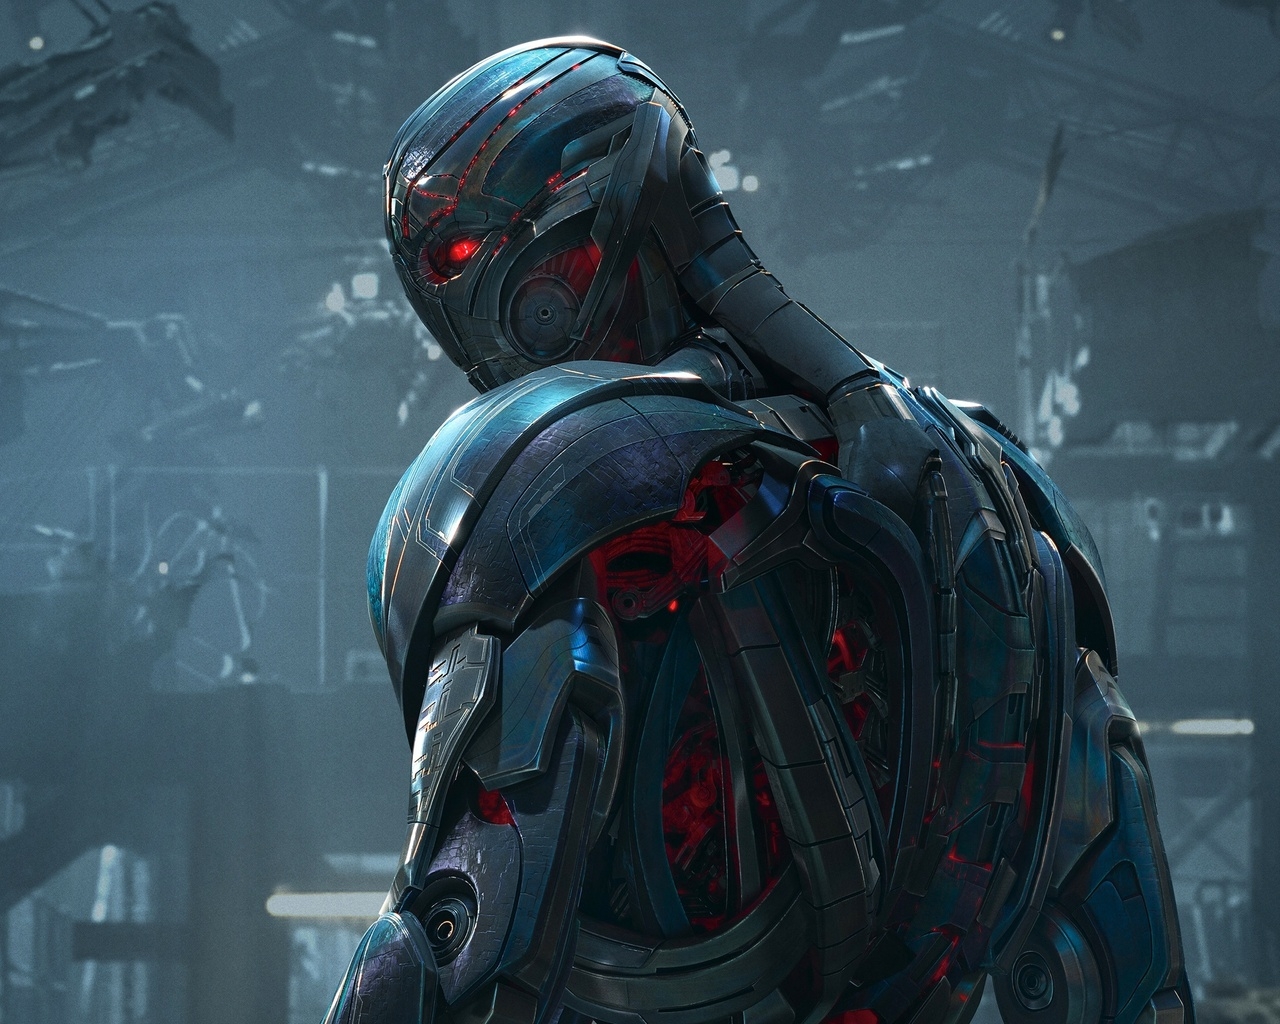 Ultron from Avengers for 1280 x 1024 resolution